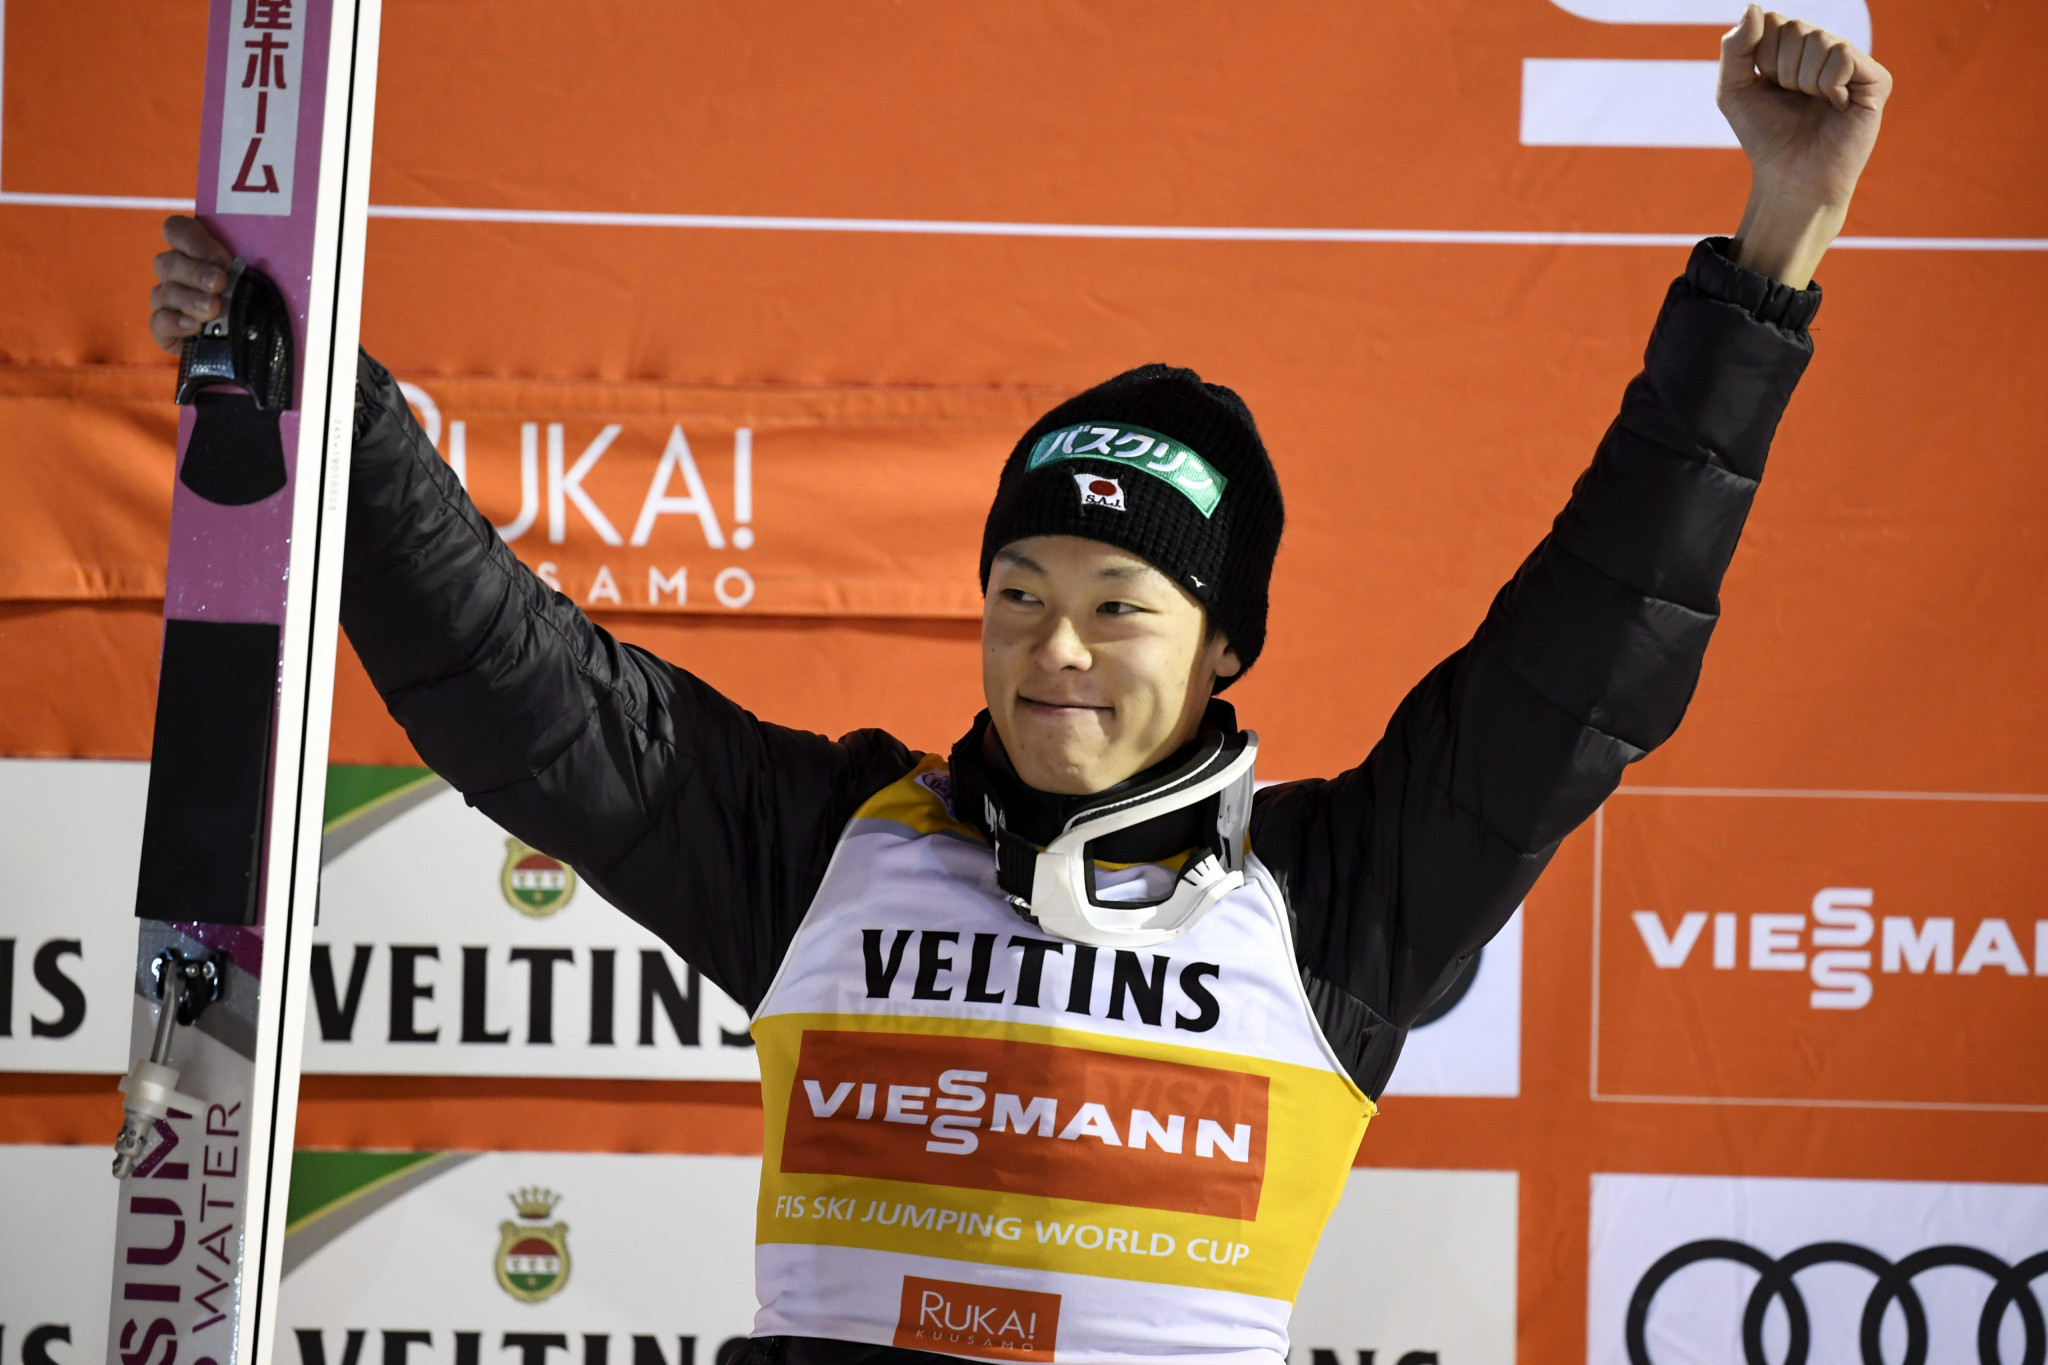 Japan's Ryoyu Kobayashi won his second FIS Ski Jumping World Cup event of this season and his career ©Getty Images